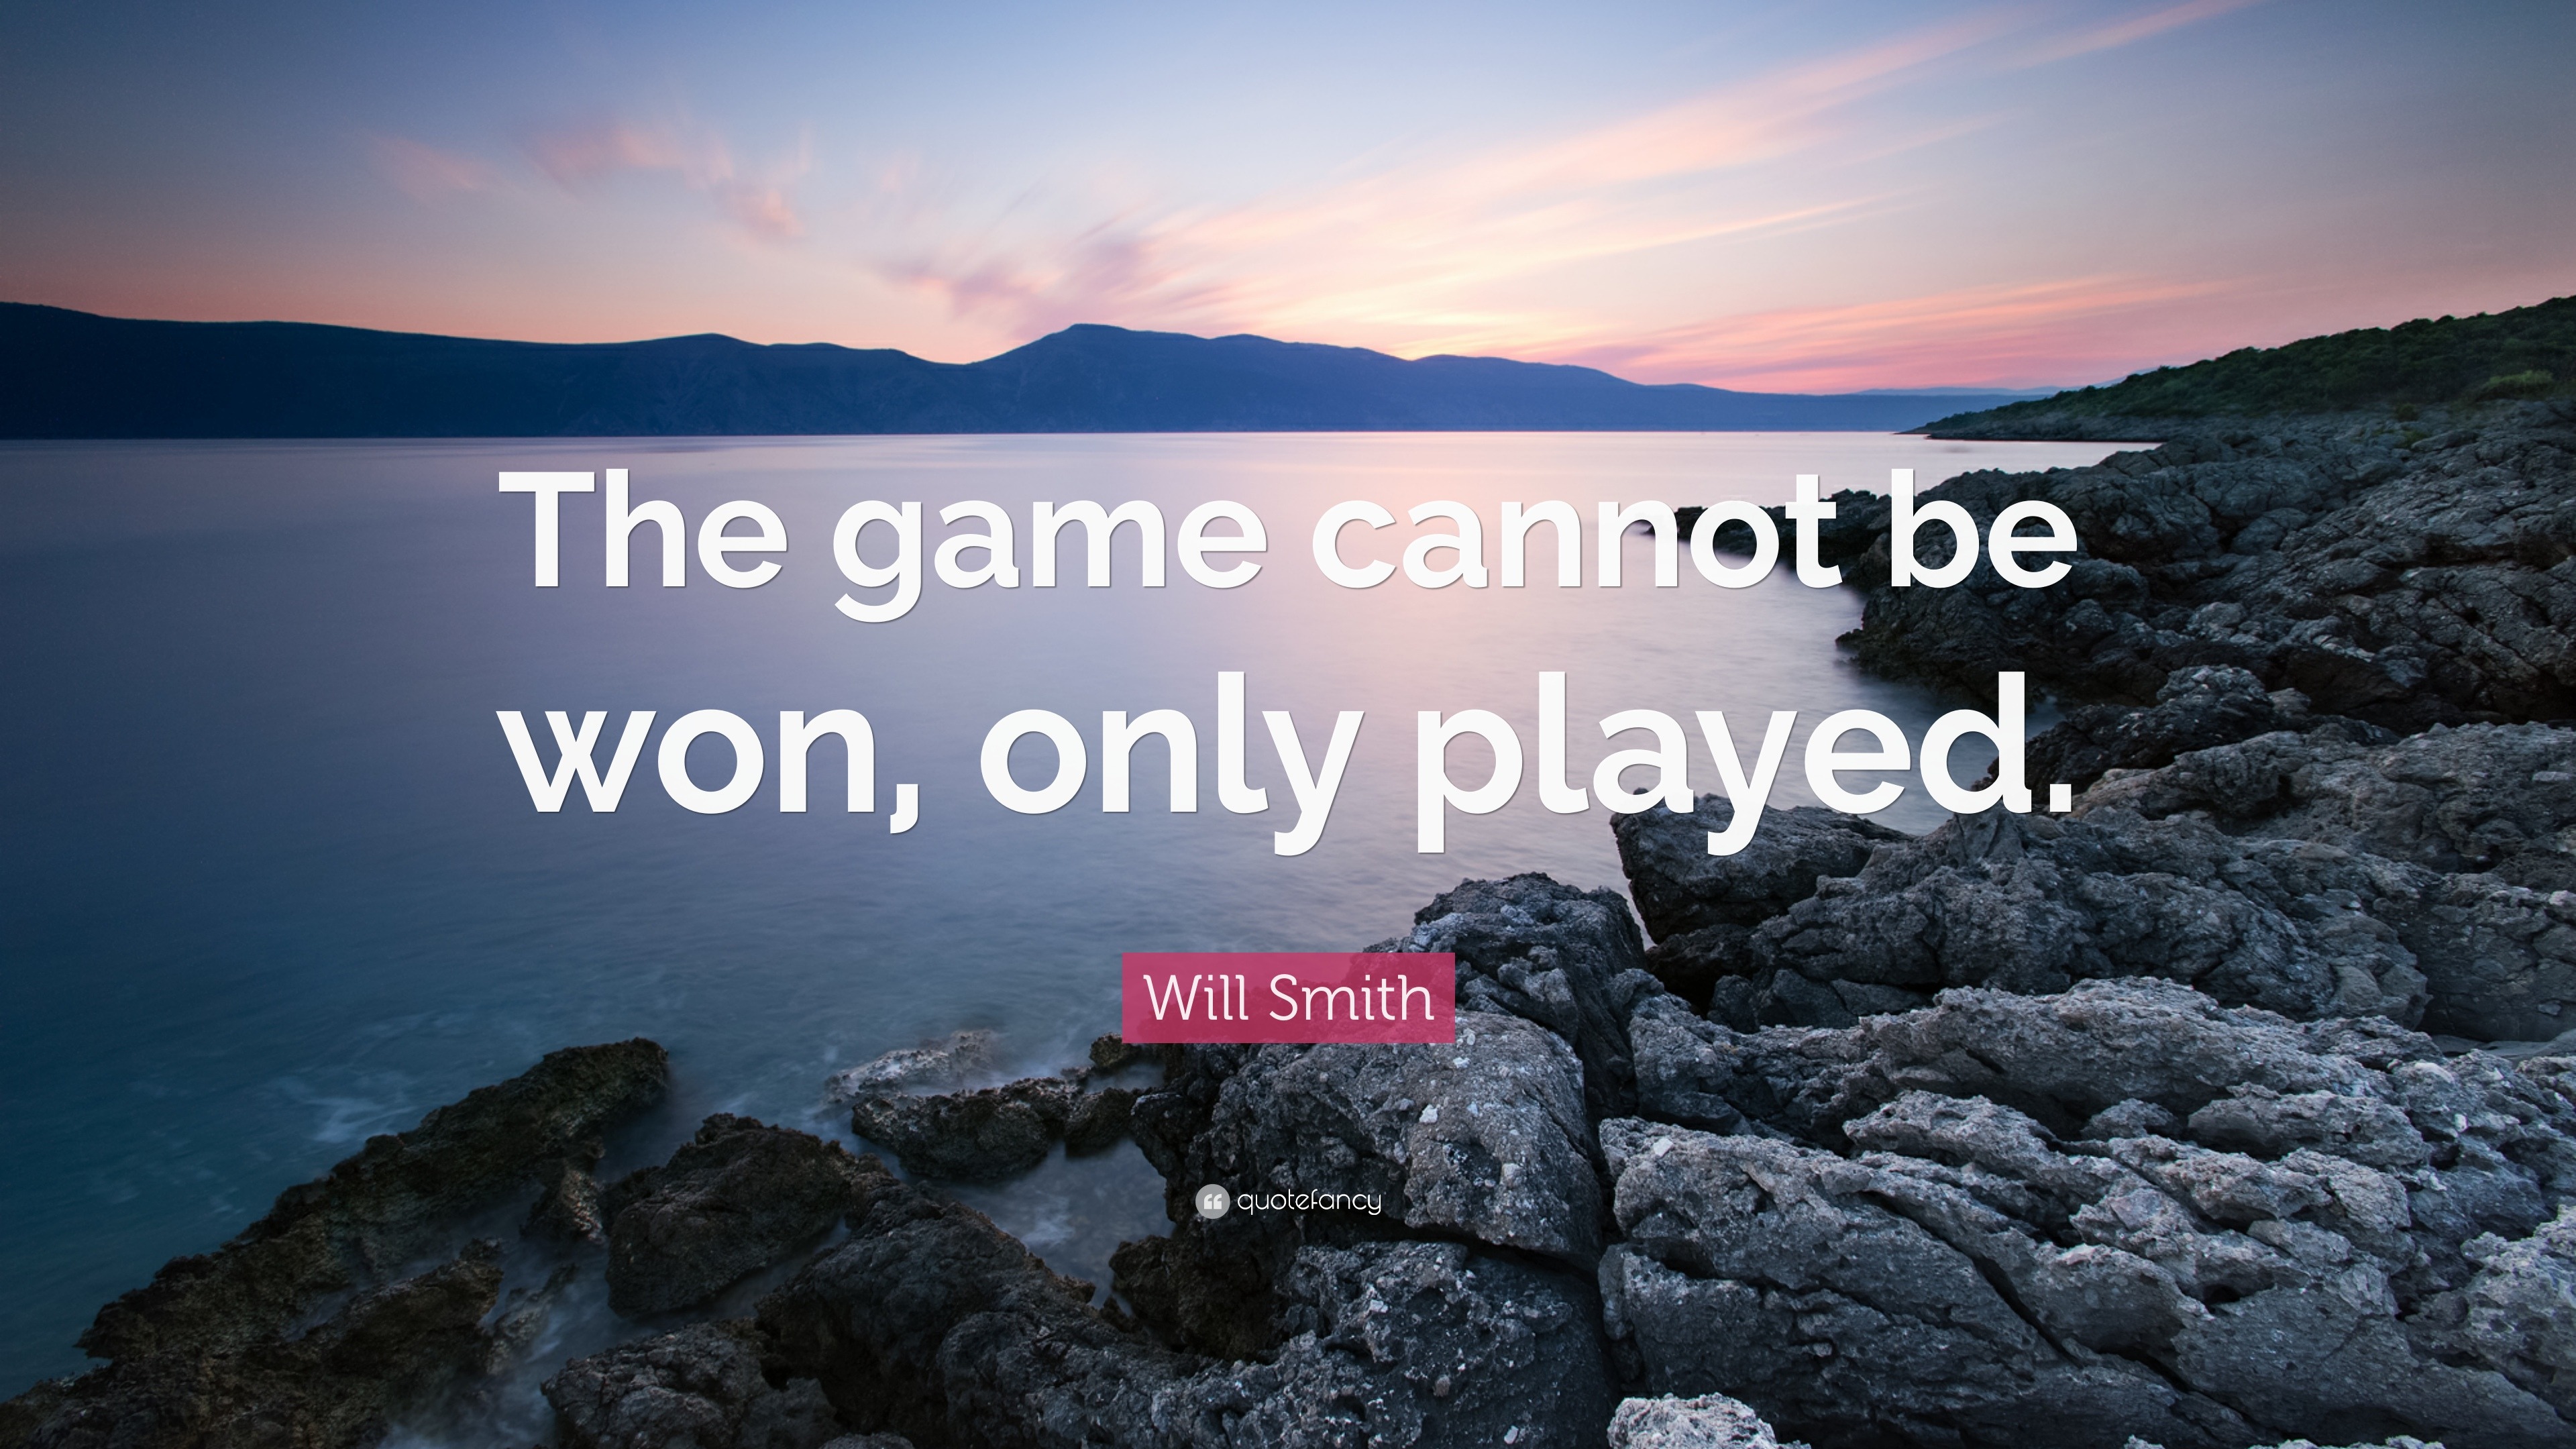 Will Smith Quote: “The game cannot be won, only played.”